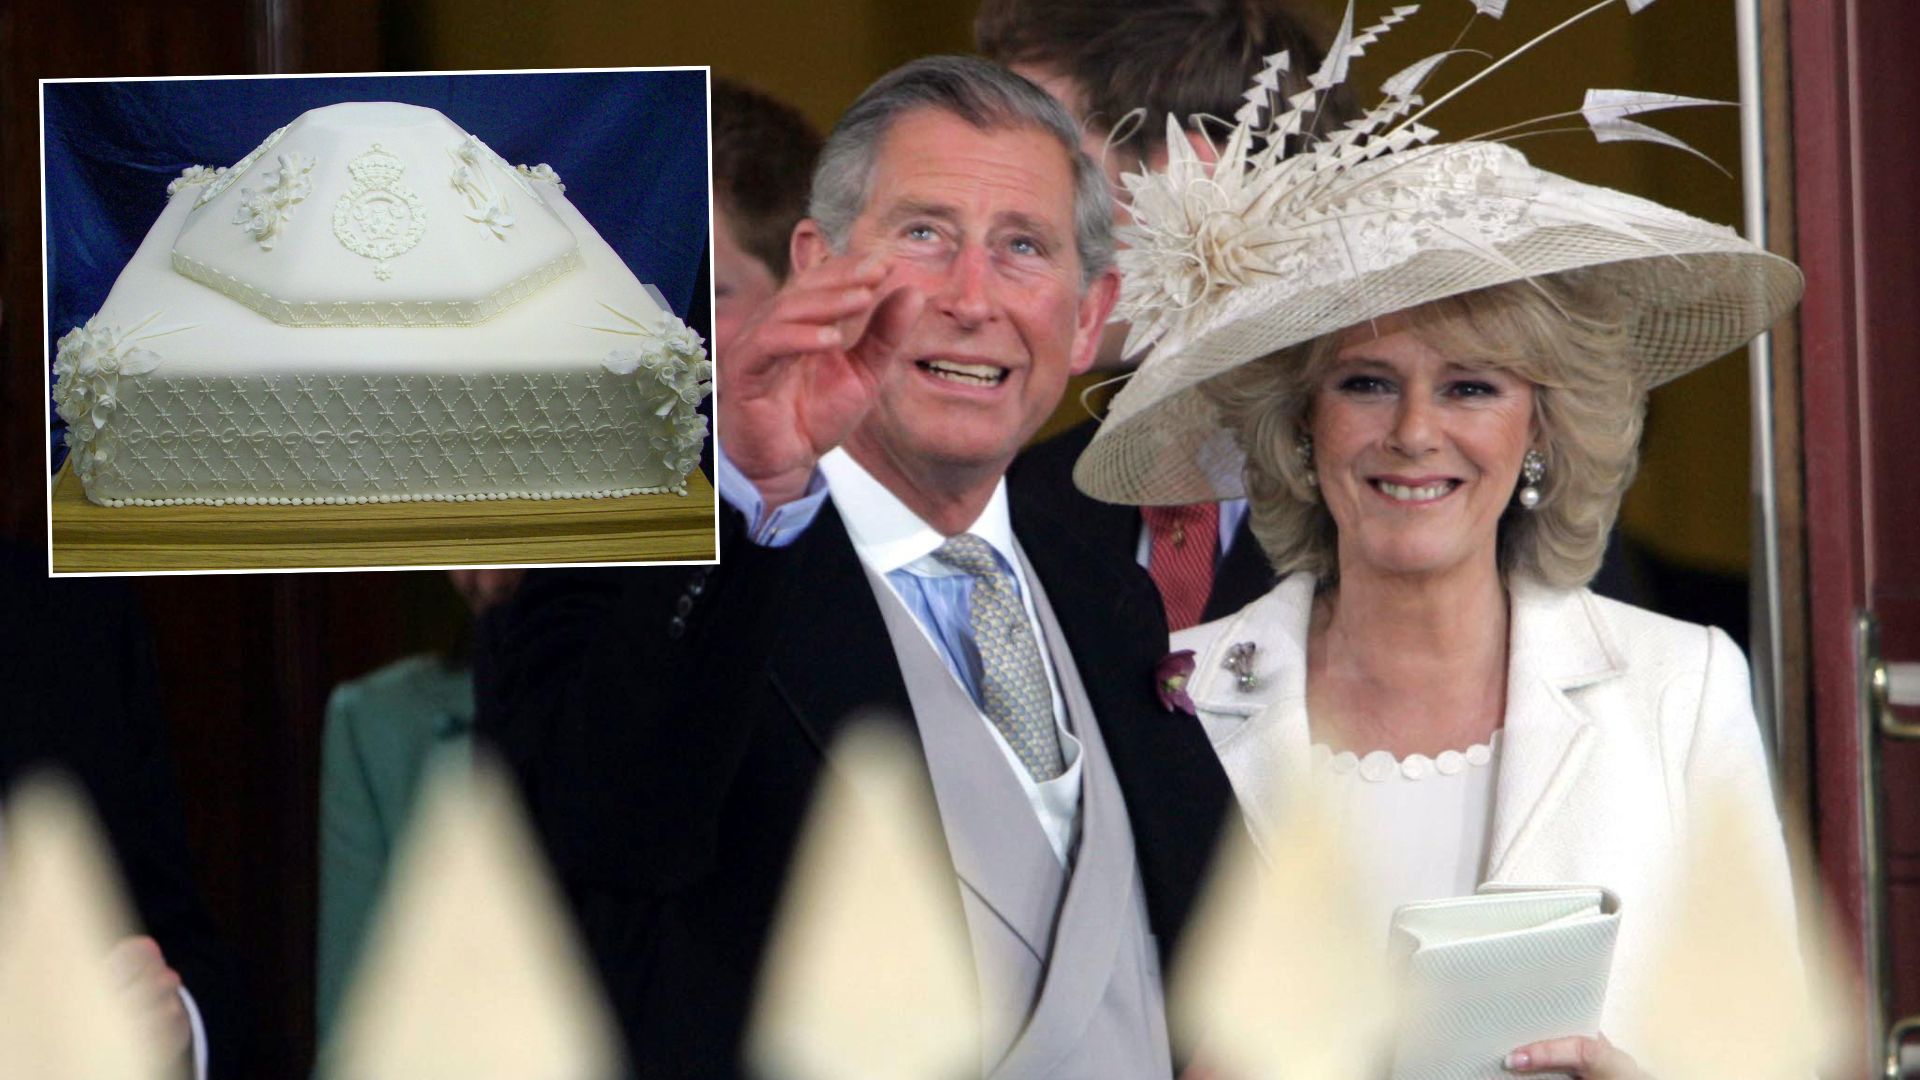 Top more than 132 royal wedding cake auction latest - awesomeenglish.edu.vn